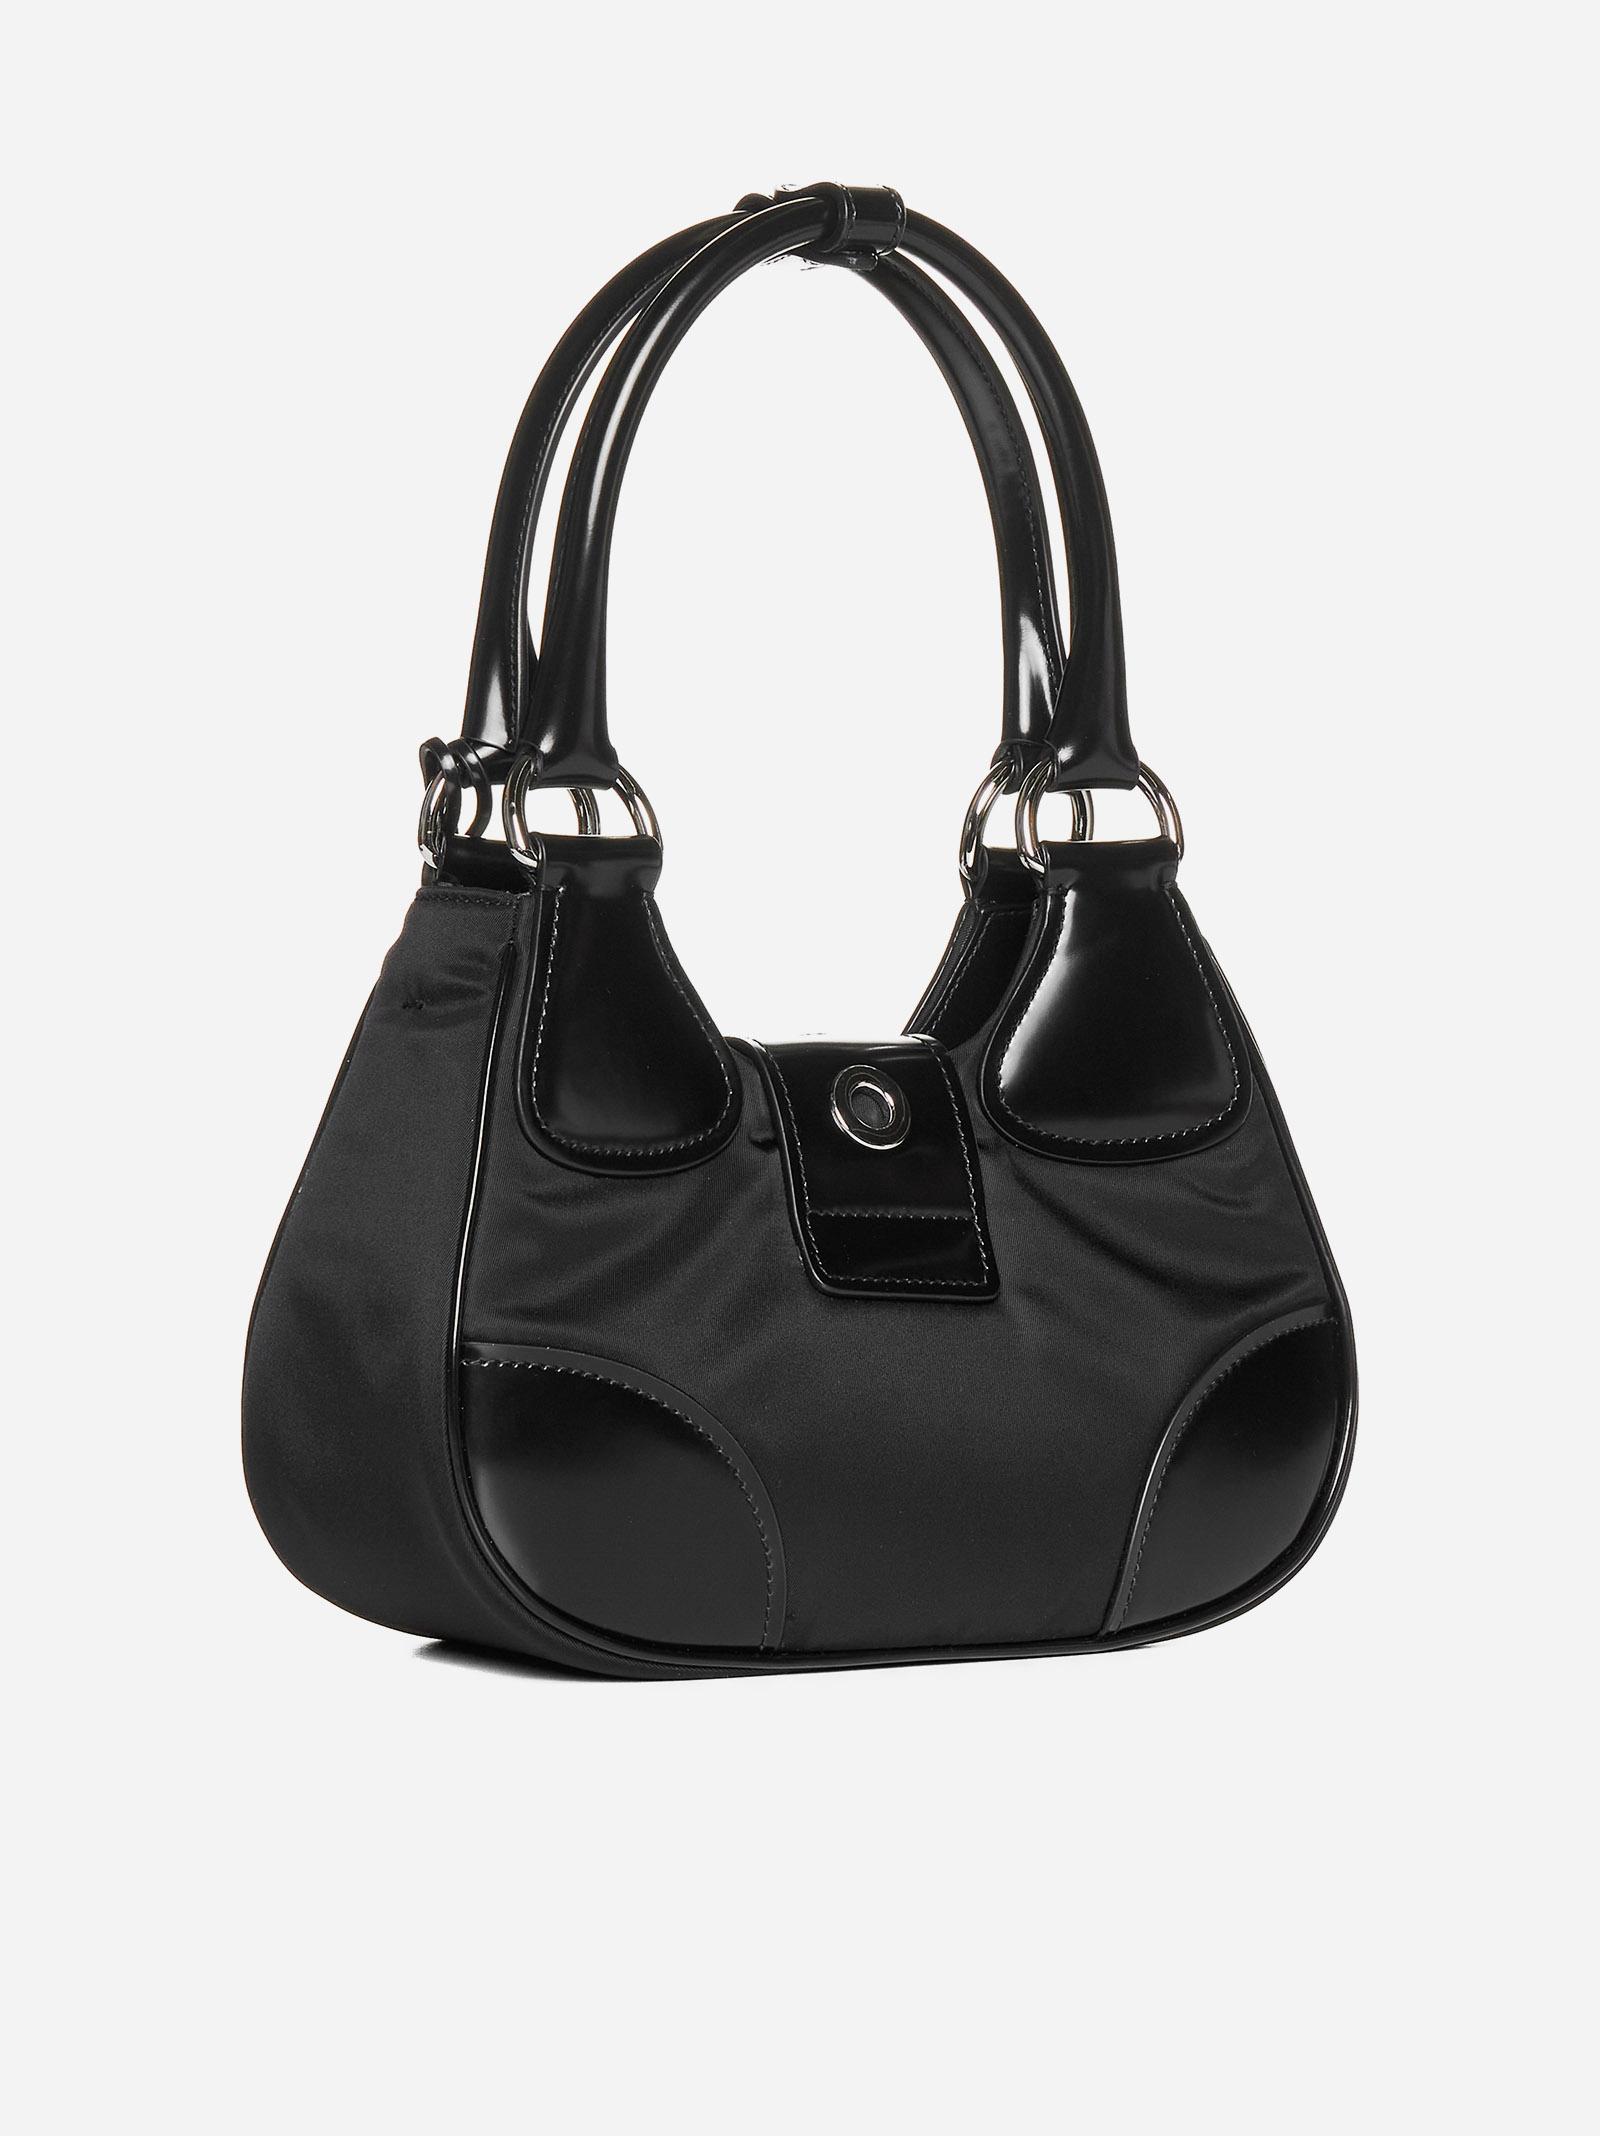 Prada Re-edition 2002 Re-nylon And Leather Bag in Black